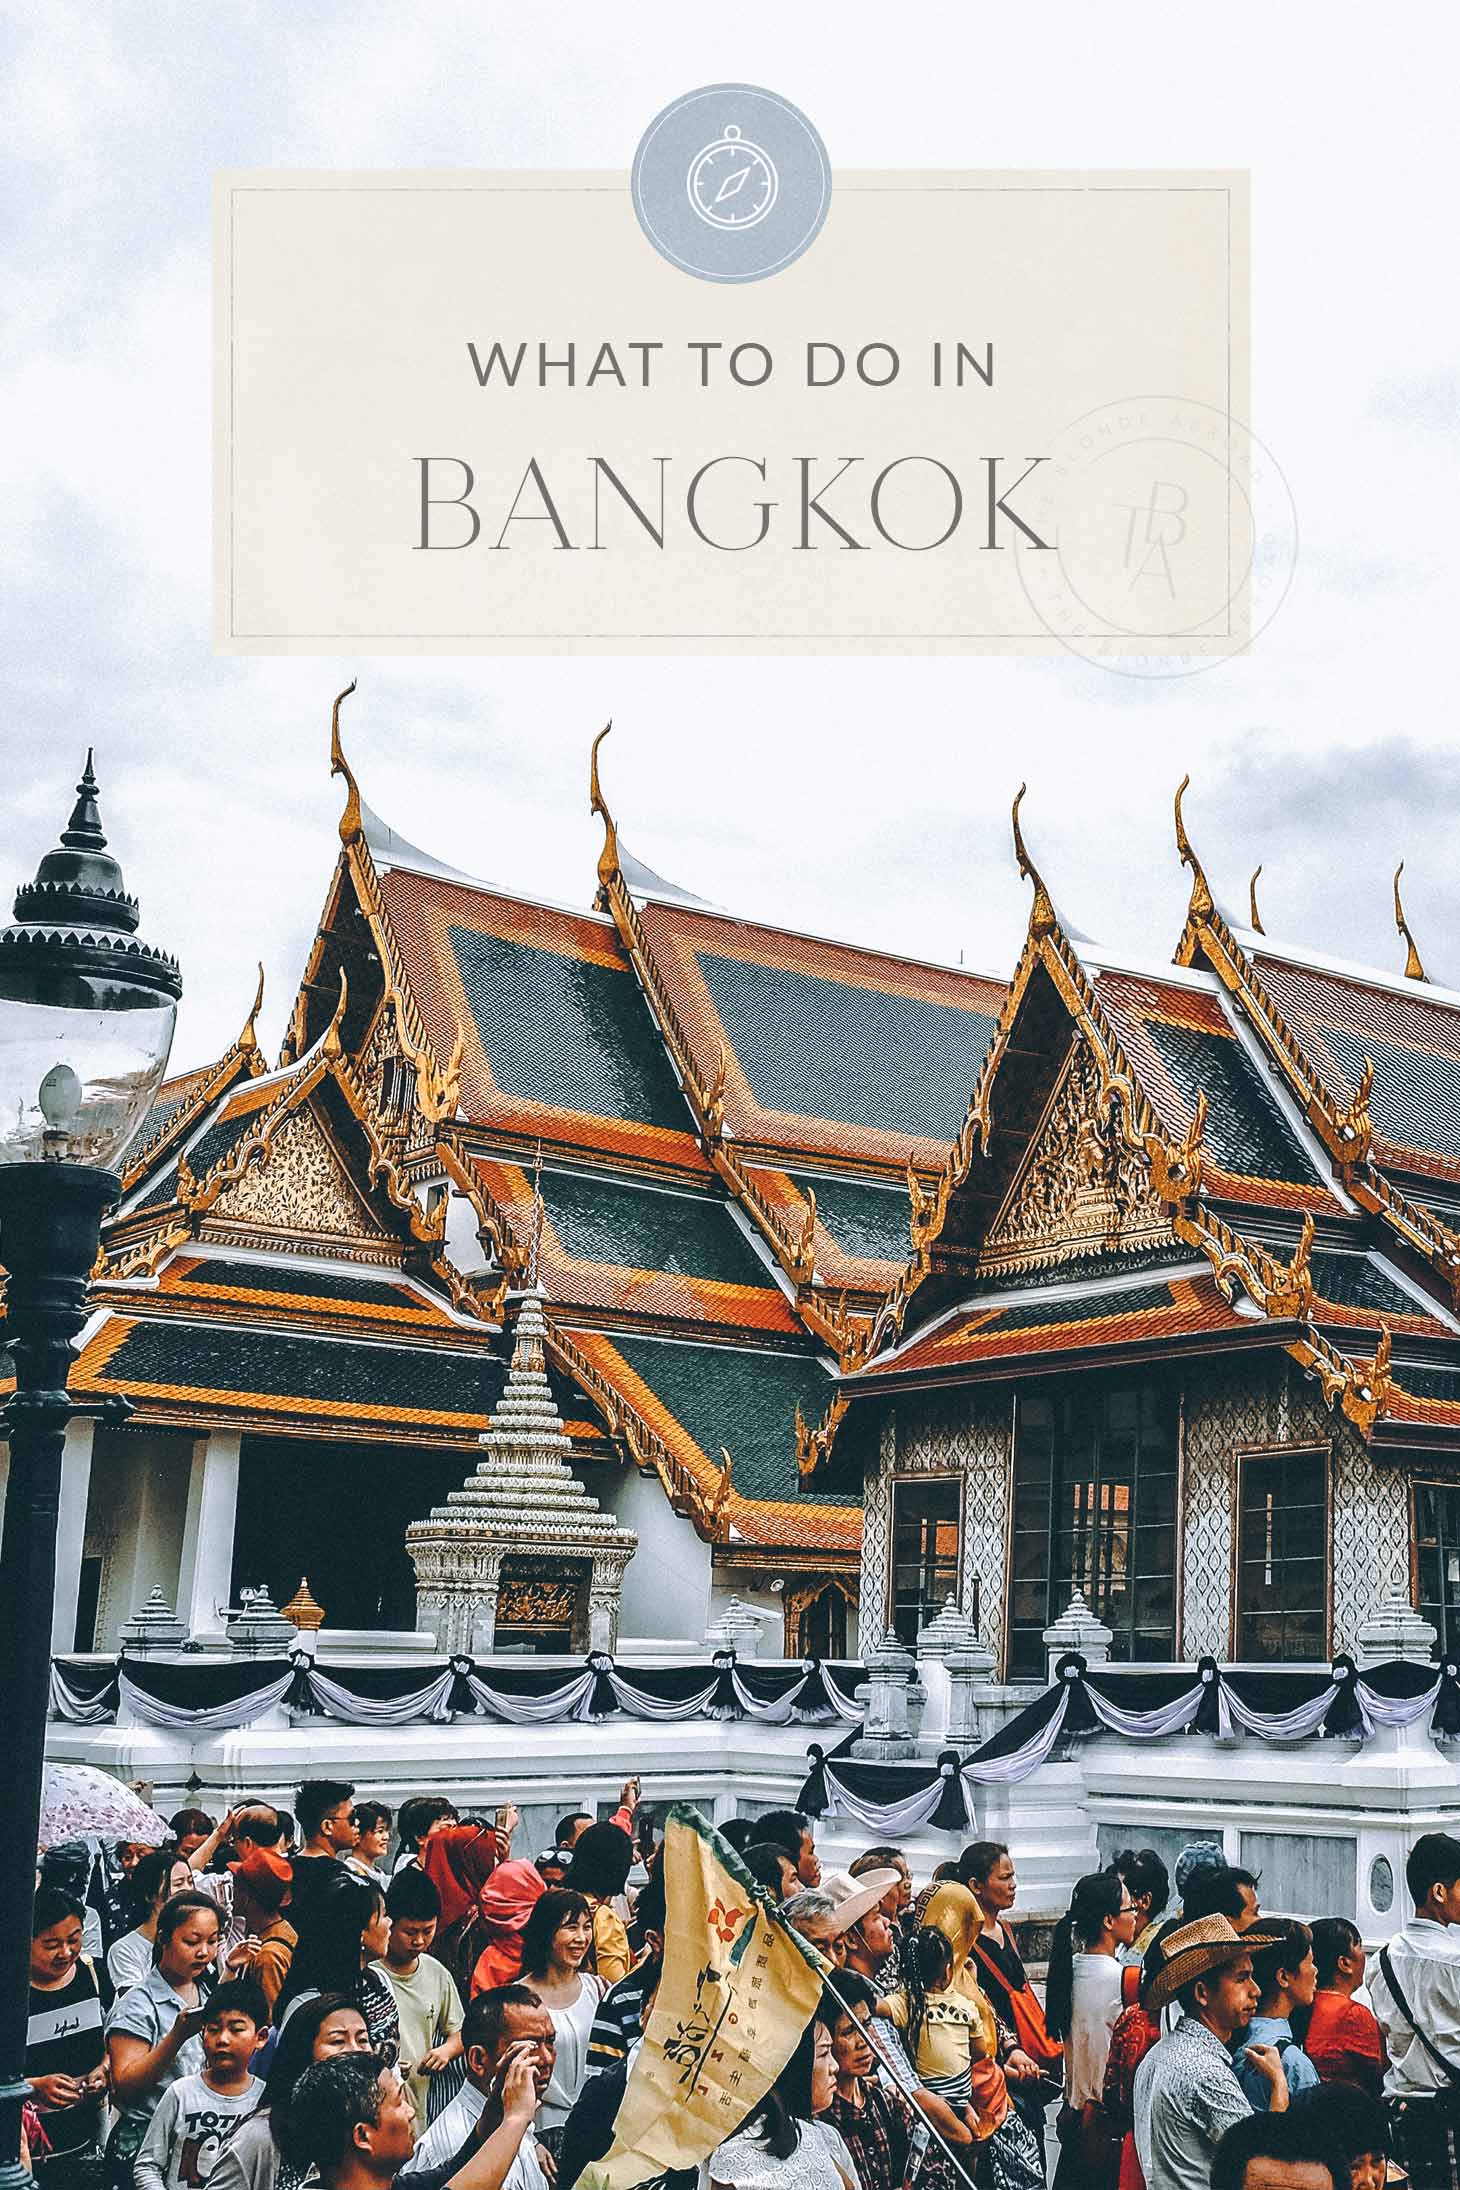 Bangkok Travel Guide: Everything You Need To Know About The City